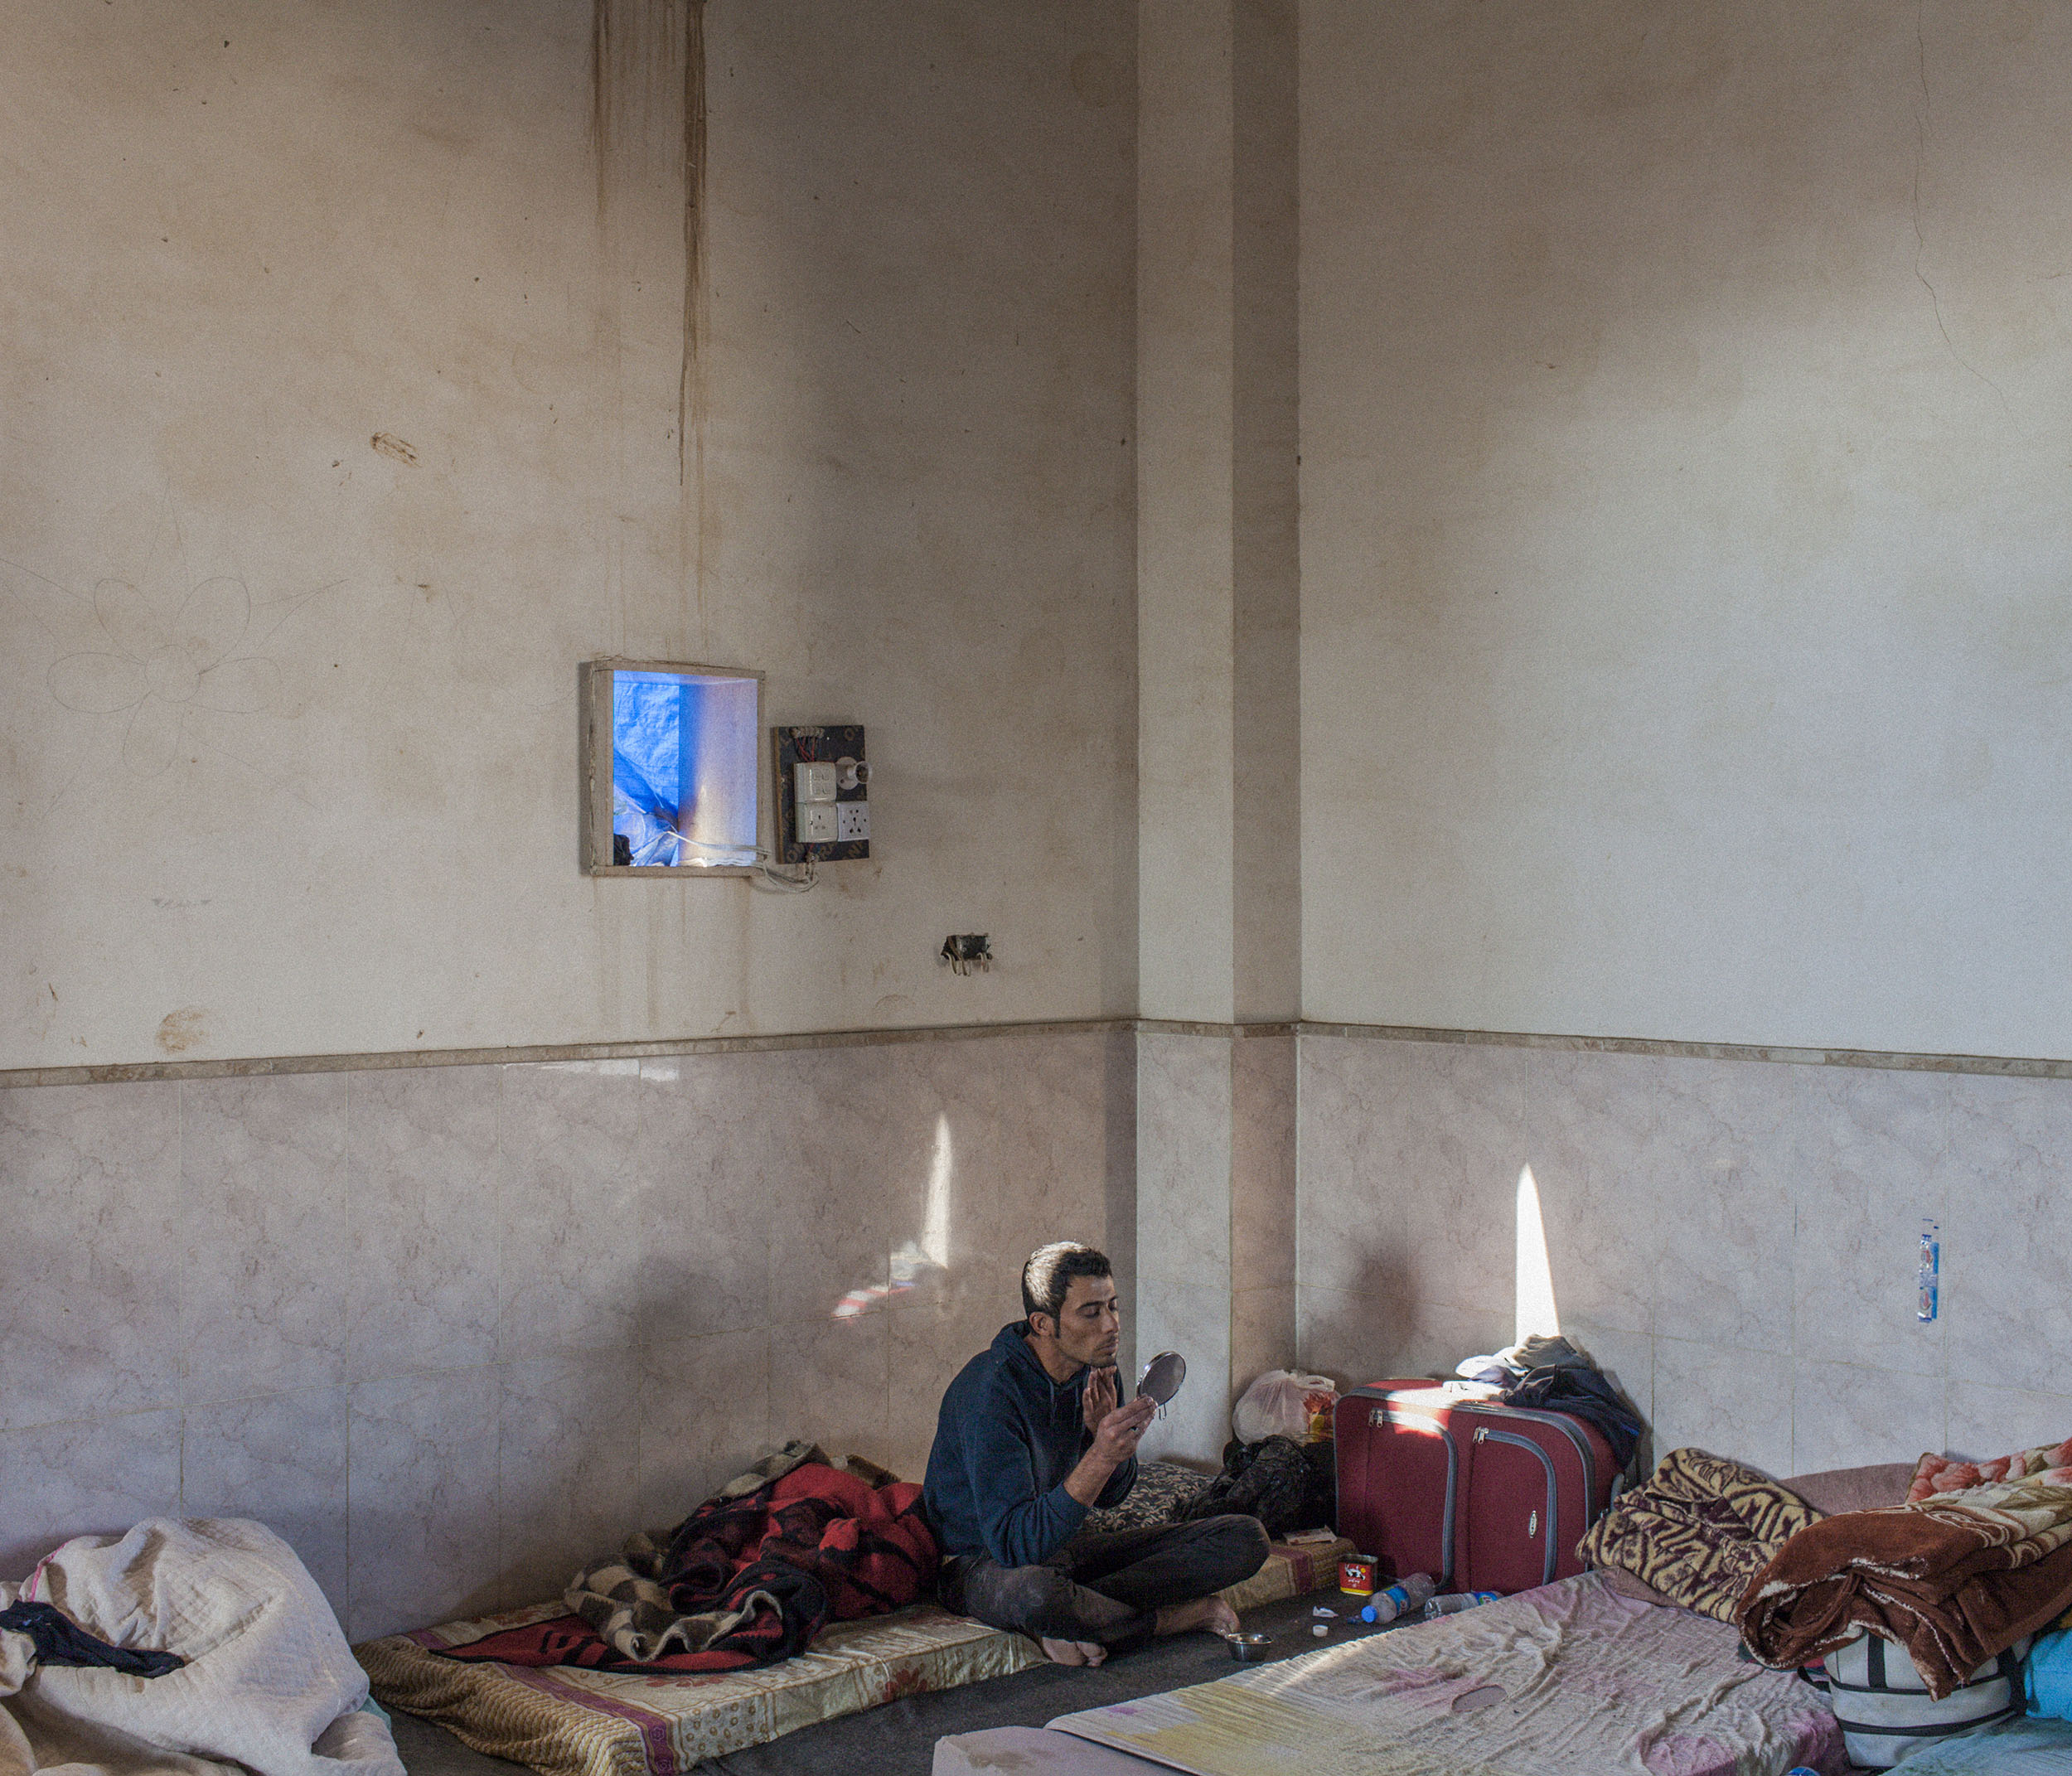  A young Syrian Kurdish refugee shaves in an unfinished mosque where up to 100 single men were living in squalid conditions in Domiz Refugee camp in Northern Iraq. With families and women being given priority, single un-accompanied men were last to b